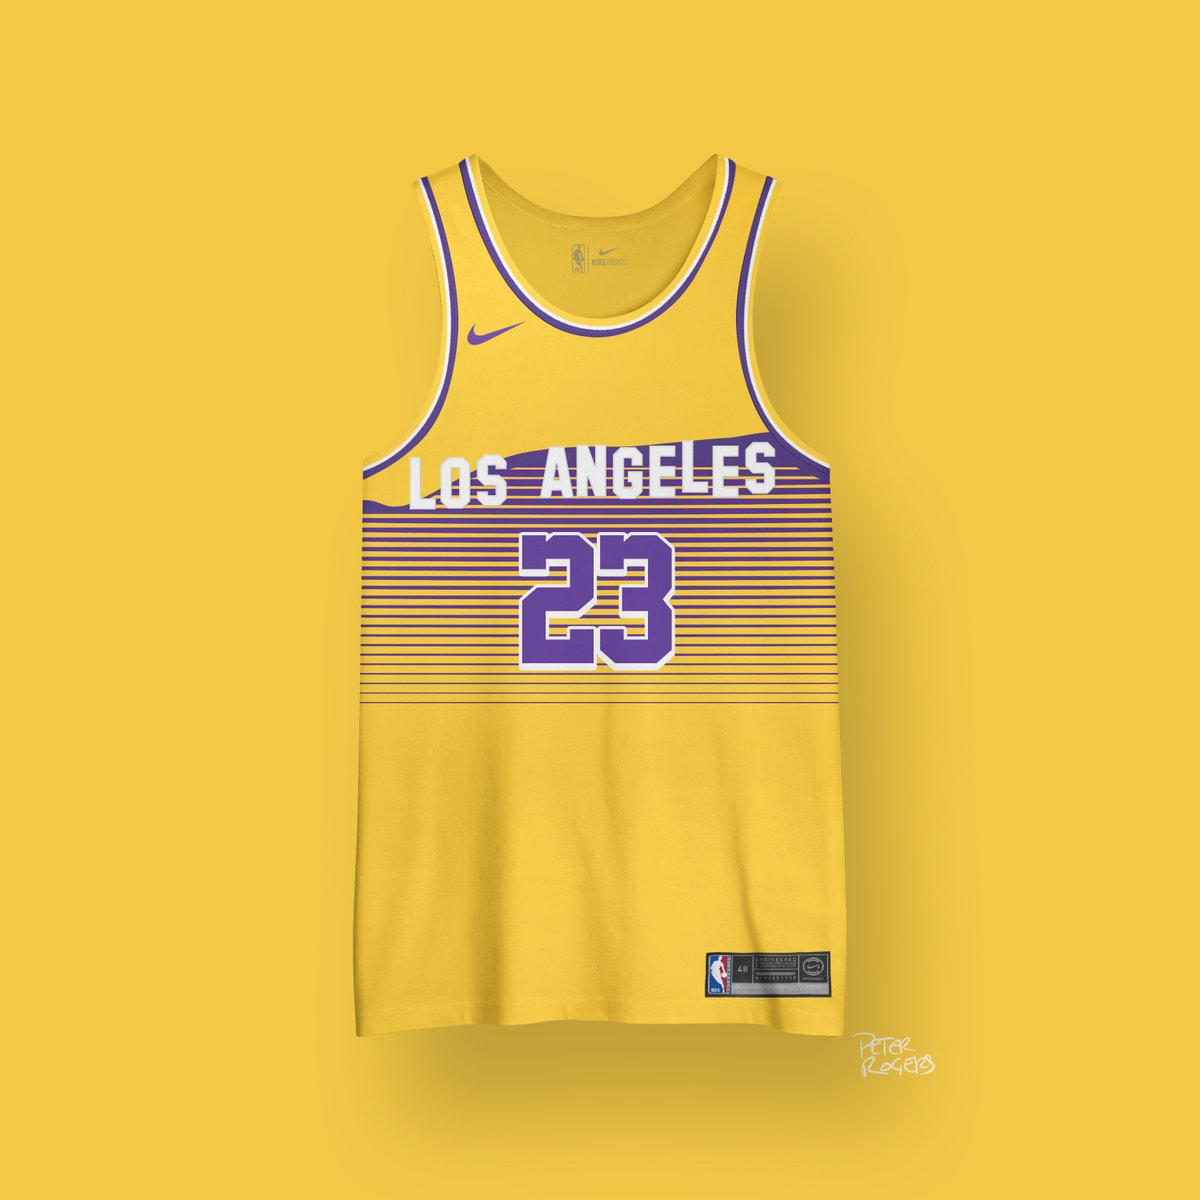 LOS ANGELES LAKERSa tribute to probably the most iconic landmark in or around LA @LakersSBN |  #lakeshow  